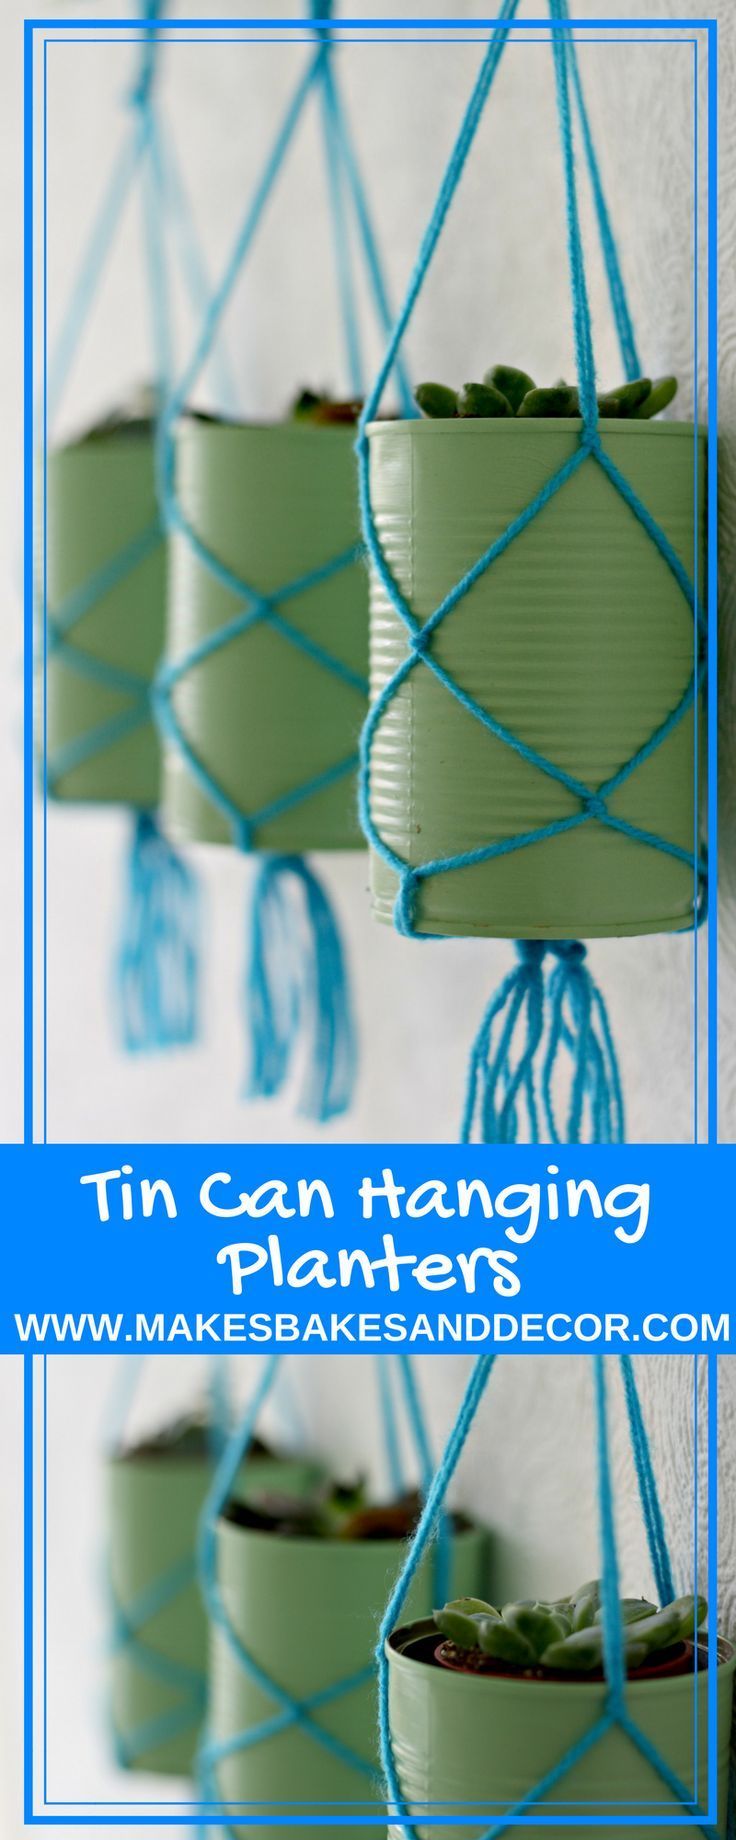 Tin Can Hanging Planters -   23 recycled crafts for teens
 ideas